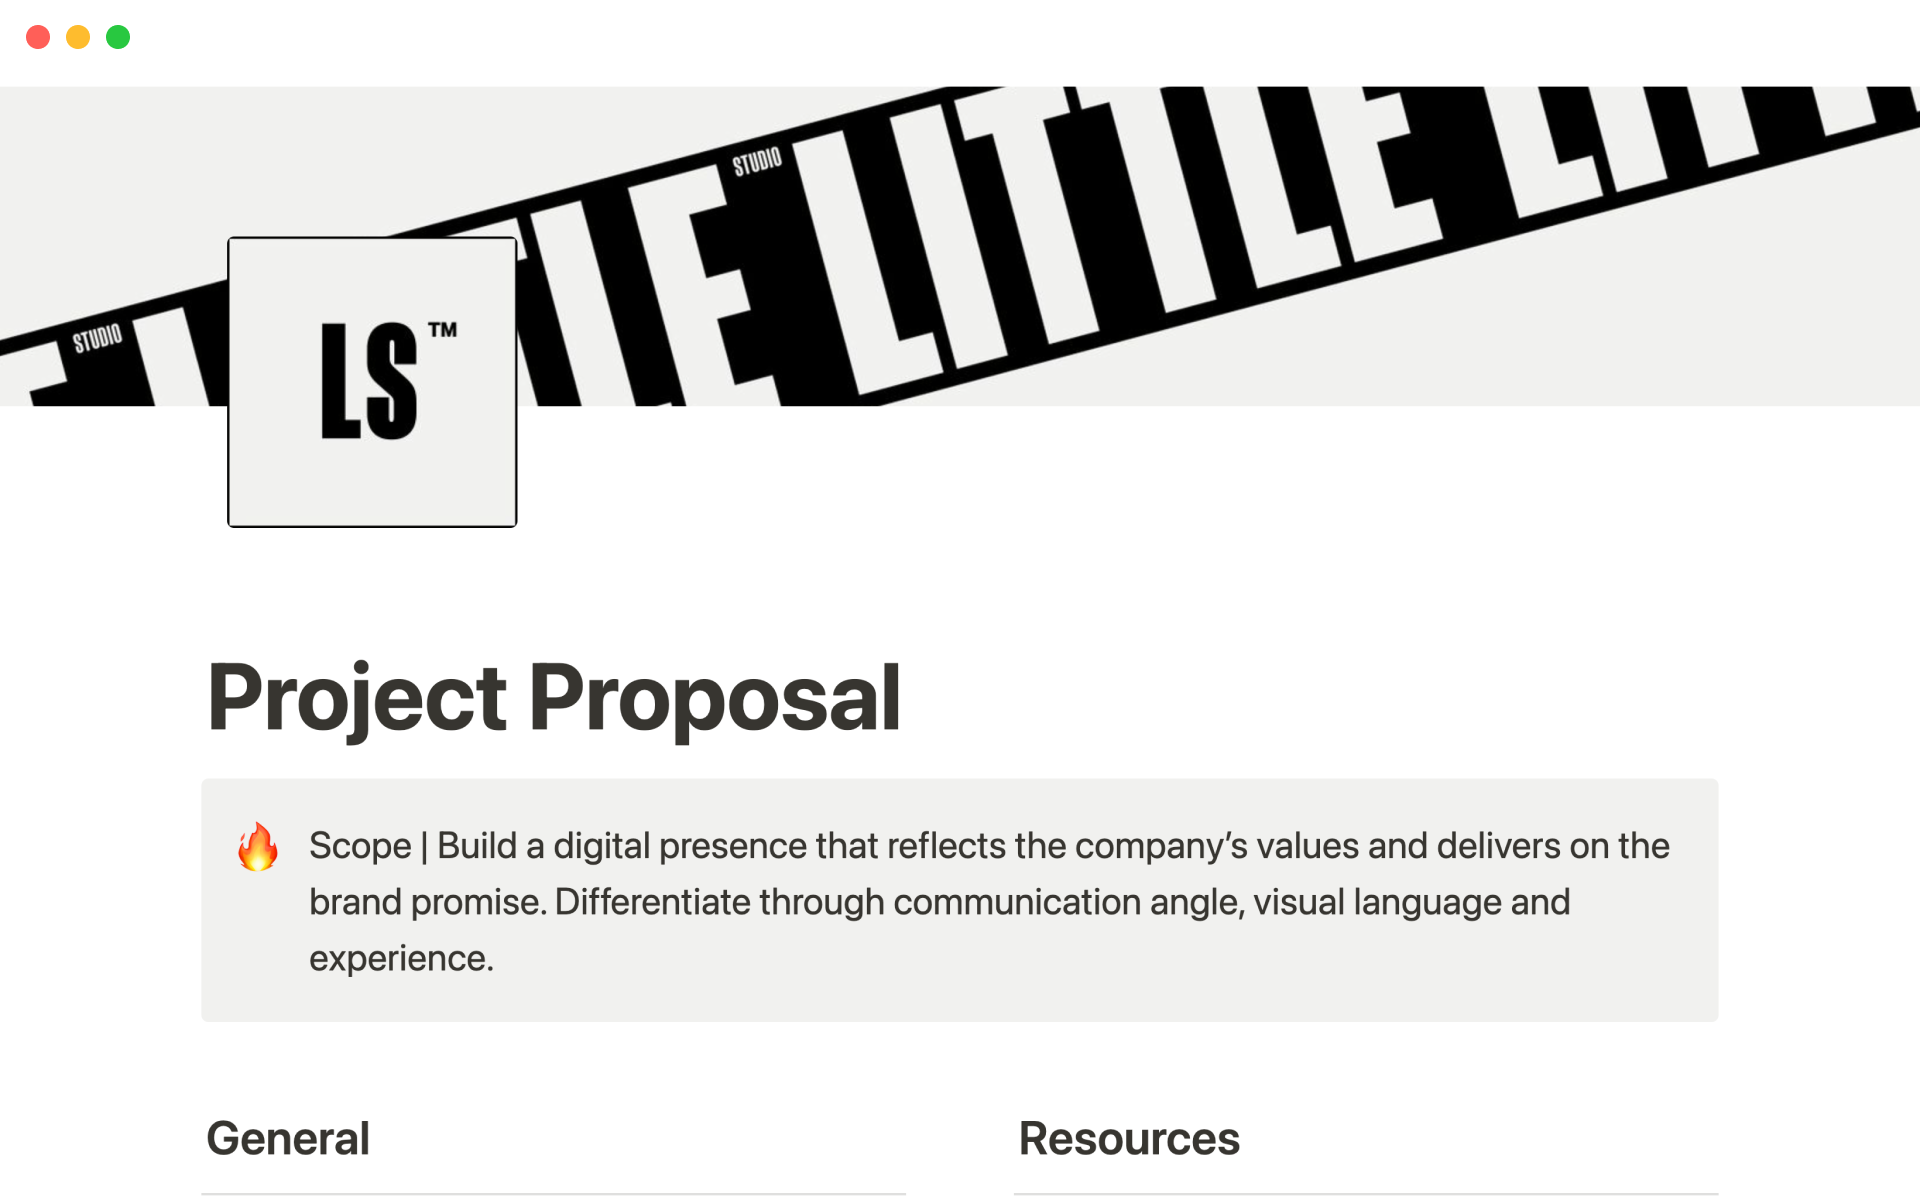 Create a professional proposal when starting a new project, ready to share with your team and client.